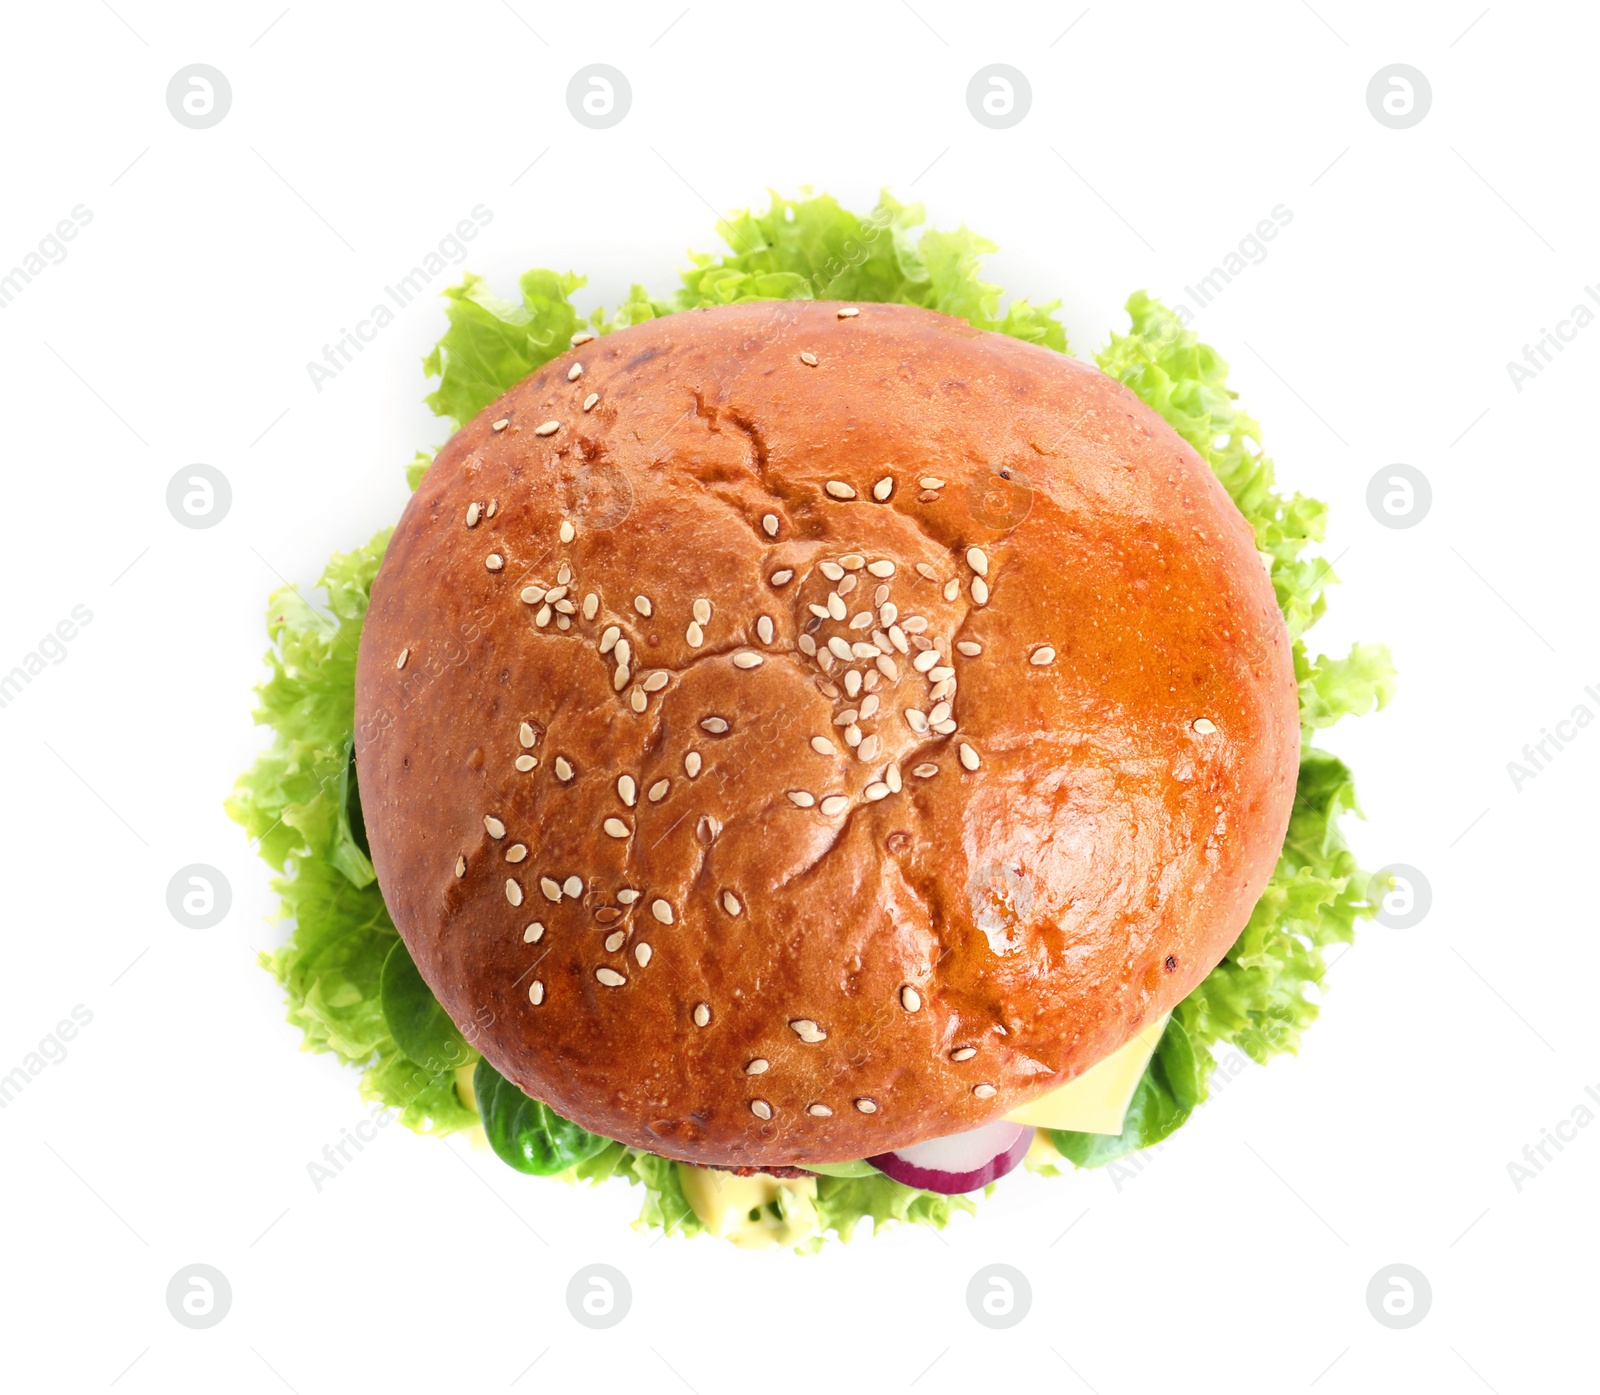 Photo of Tasty vegetarian burger on white background, top view